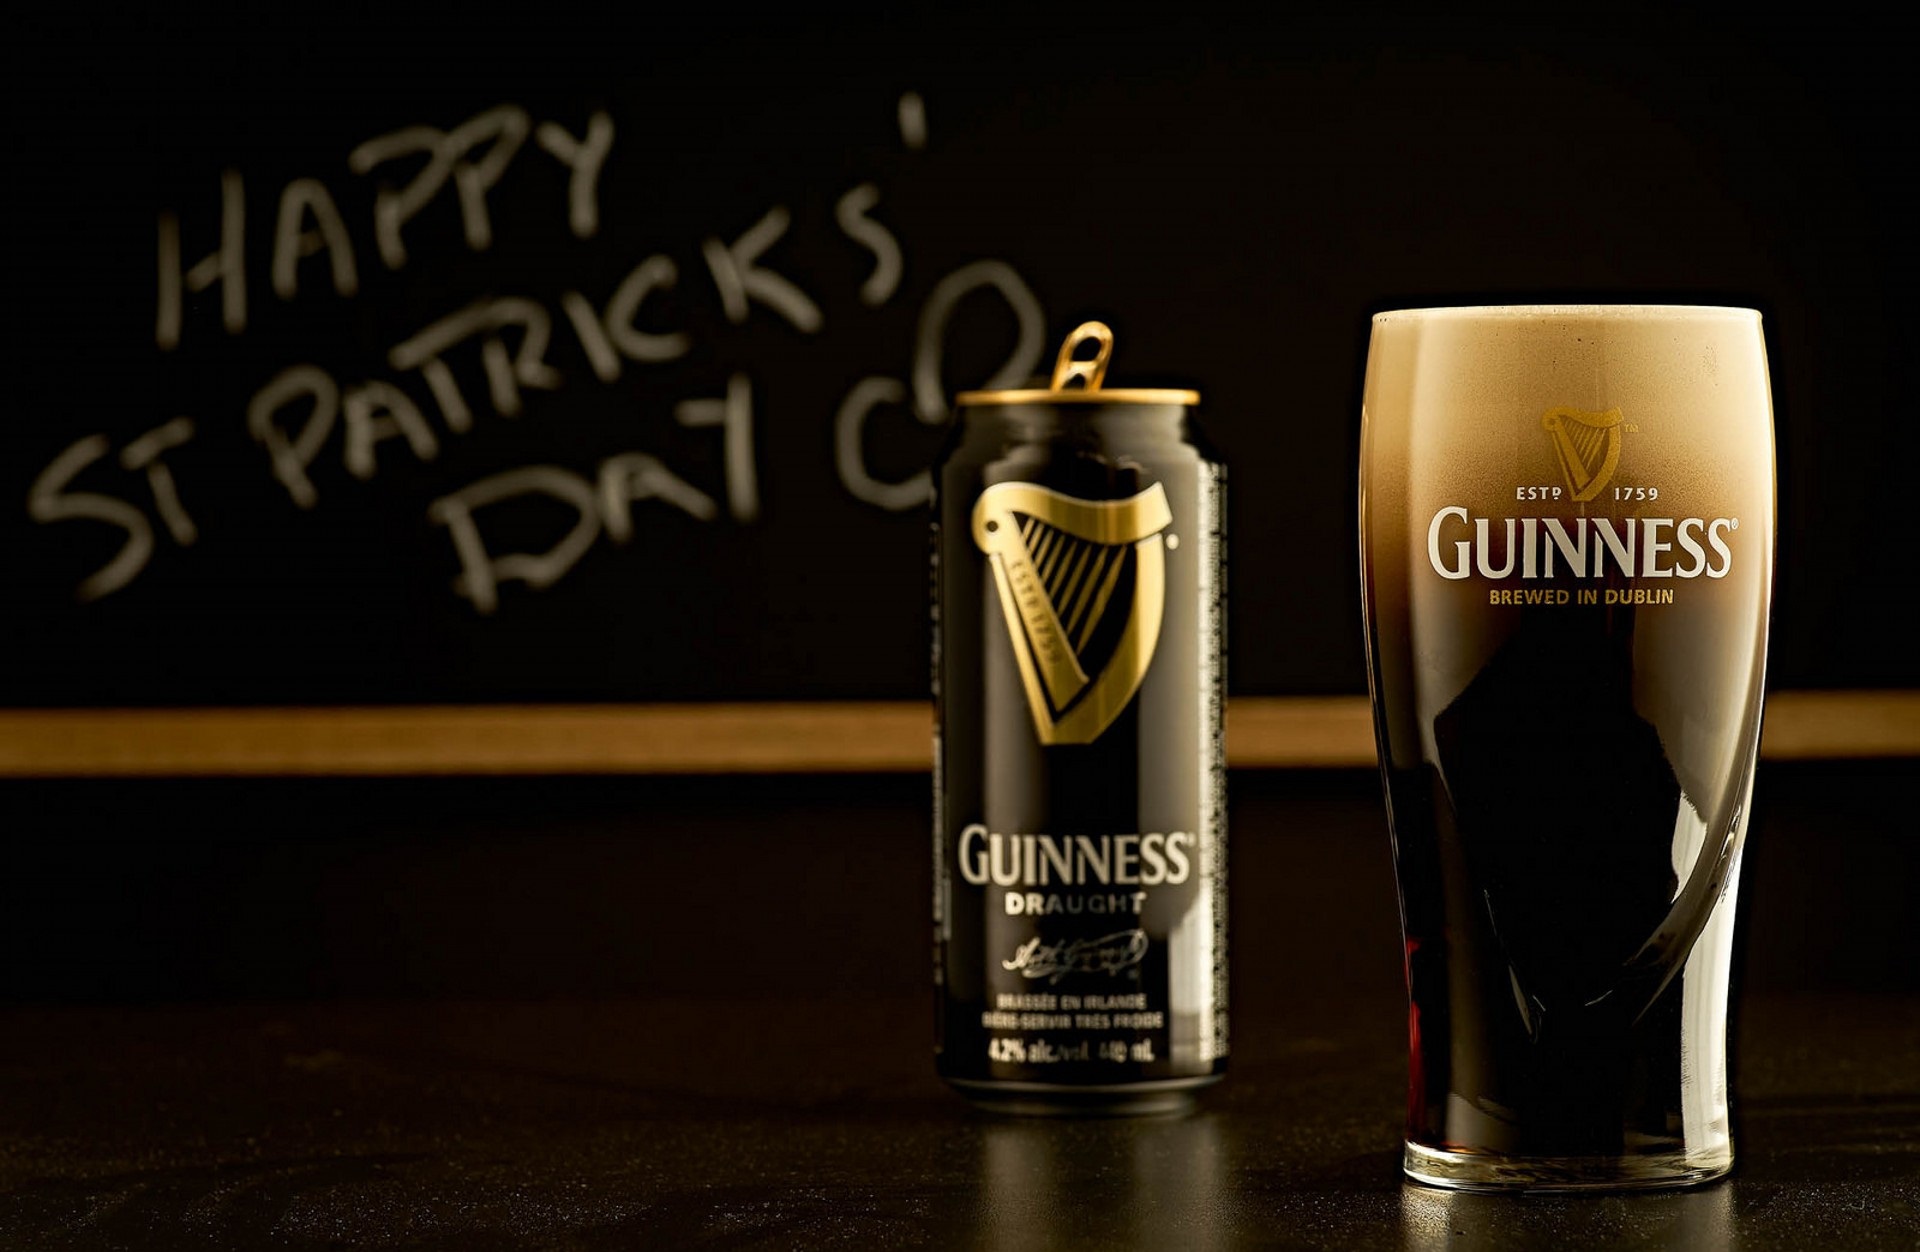 guinness, products, alcohol, beer, st patrick's day 32K